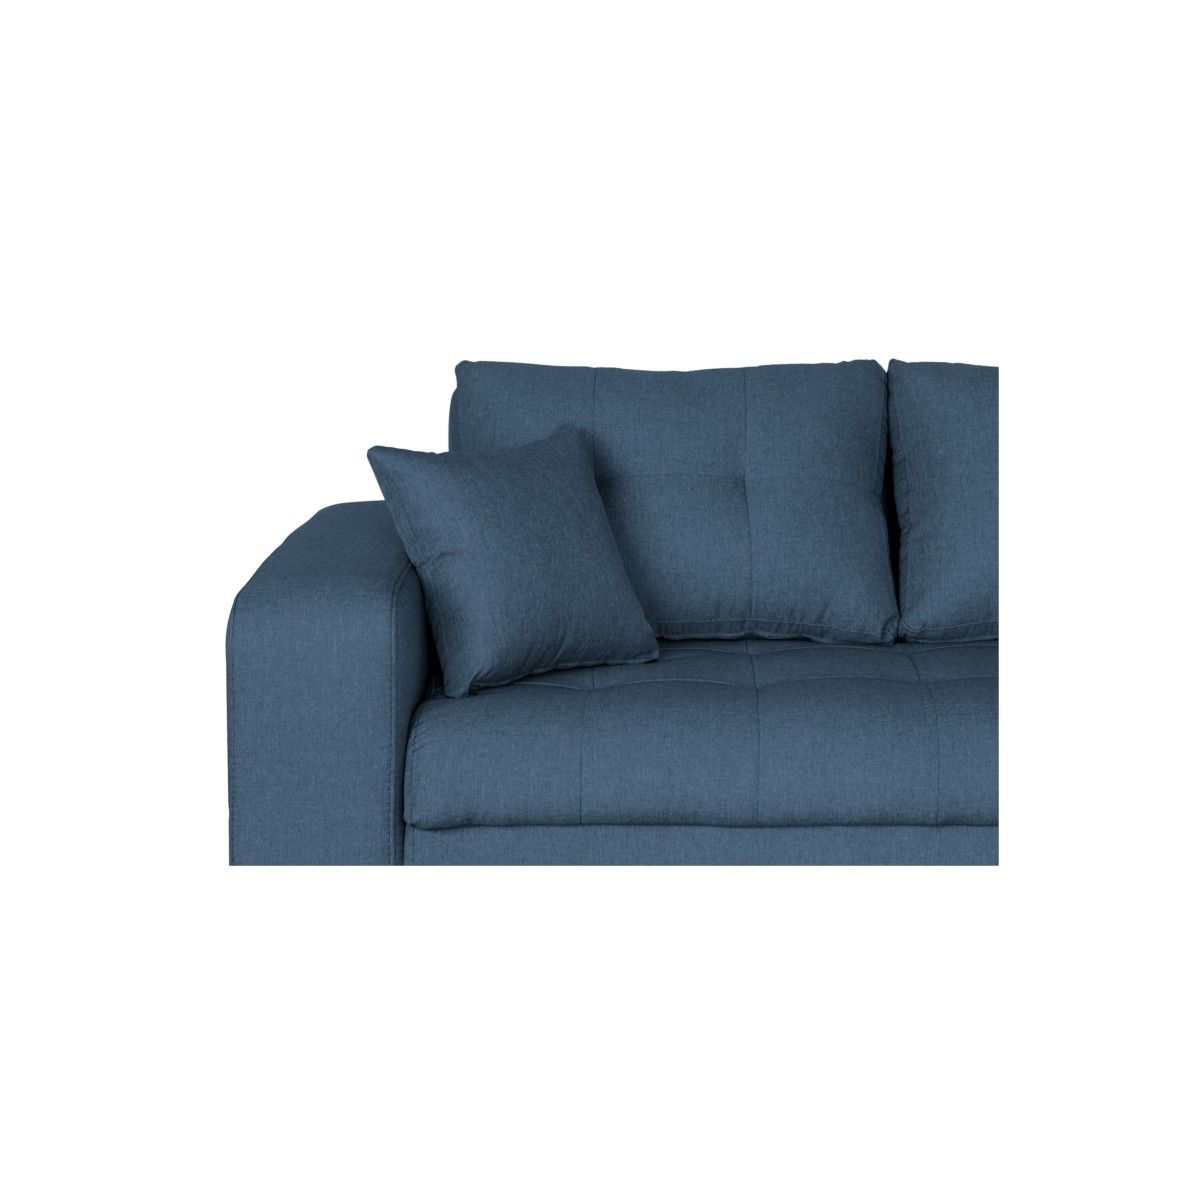 Convertible Corner Sofa 4 Places Fabric Right Angle Bond (petrol Blue) –  Amp Story 8767 In 8 Seat Convertible Sofas (View 5 of 15)